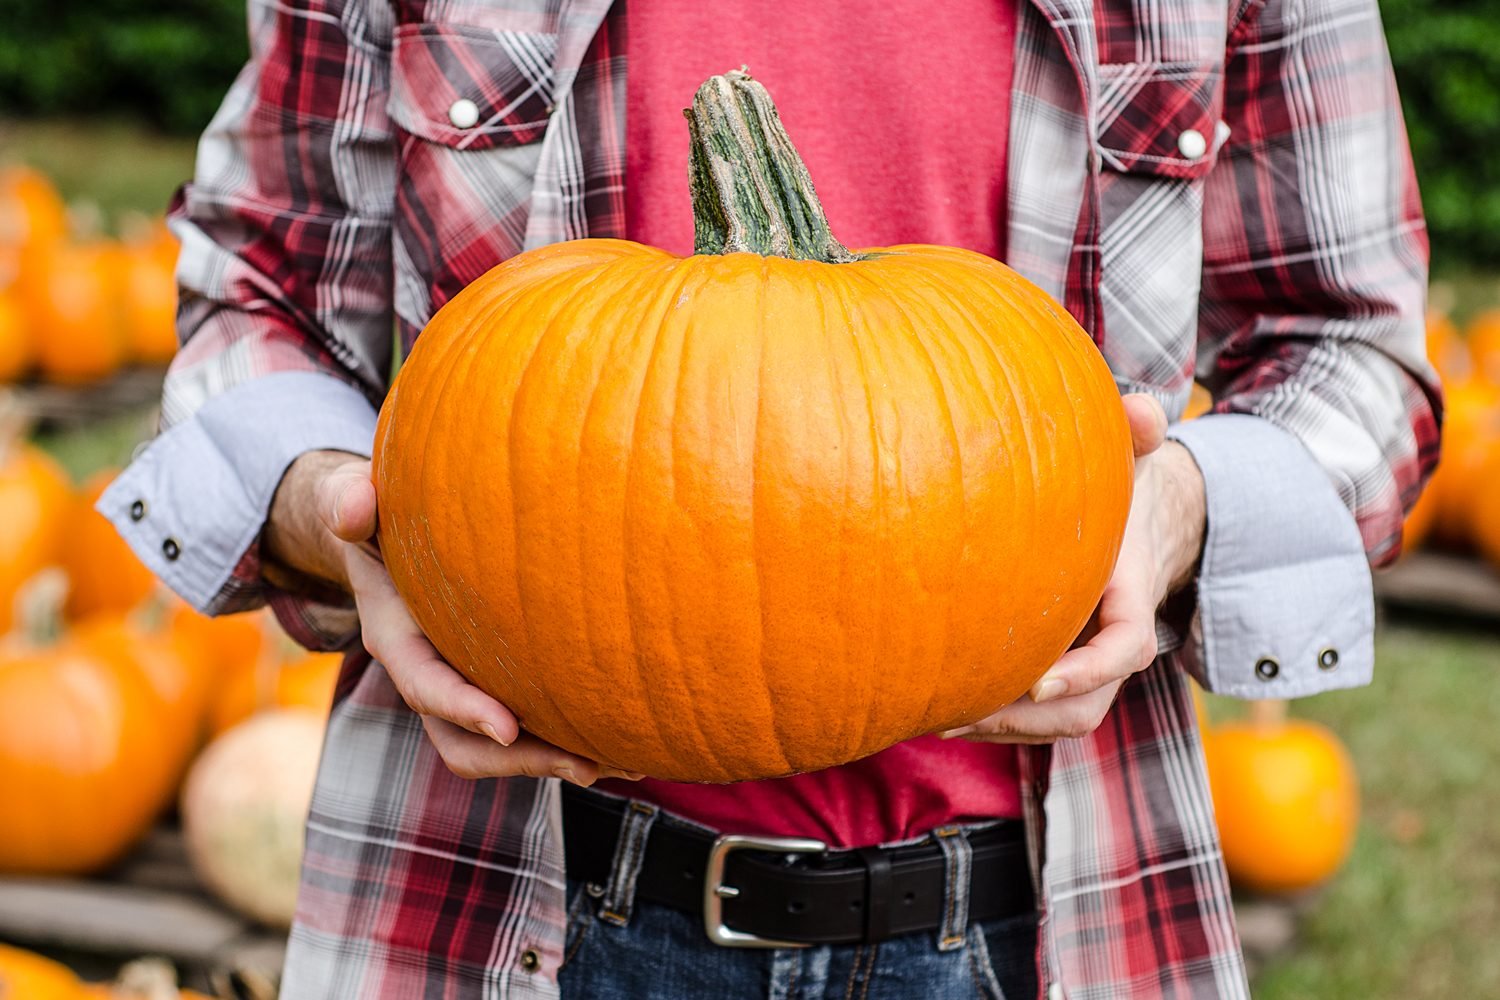 How To Choose the Freshest Pumpkin for Your Home